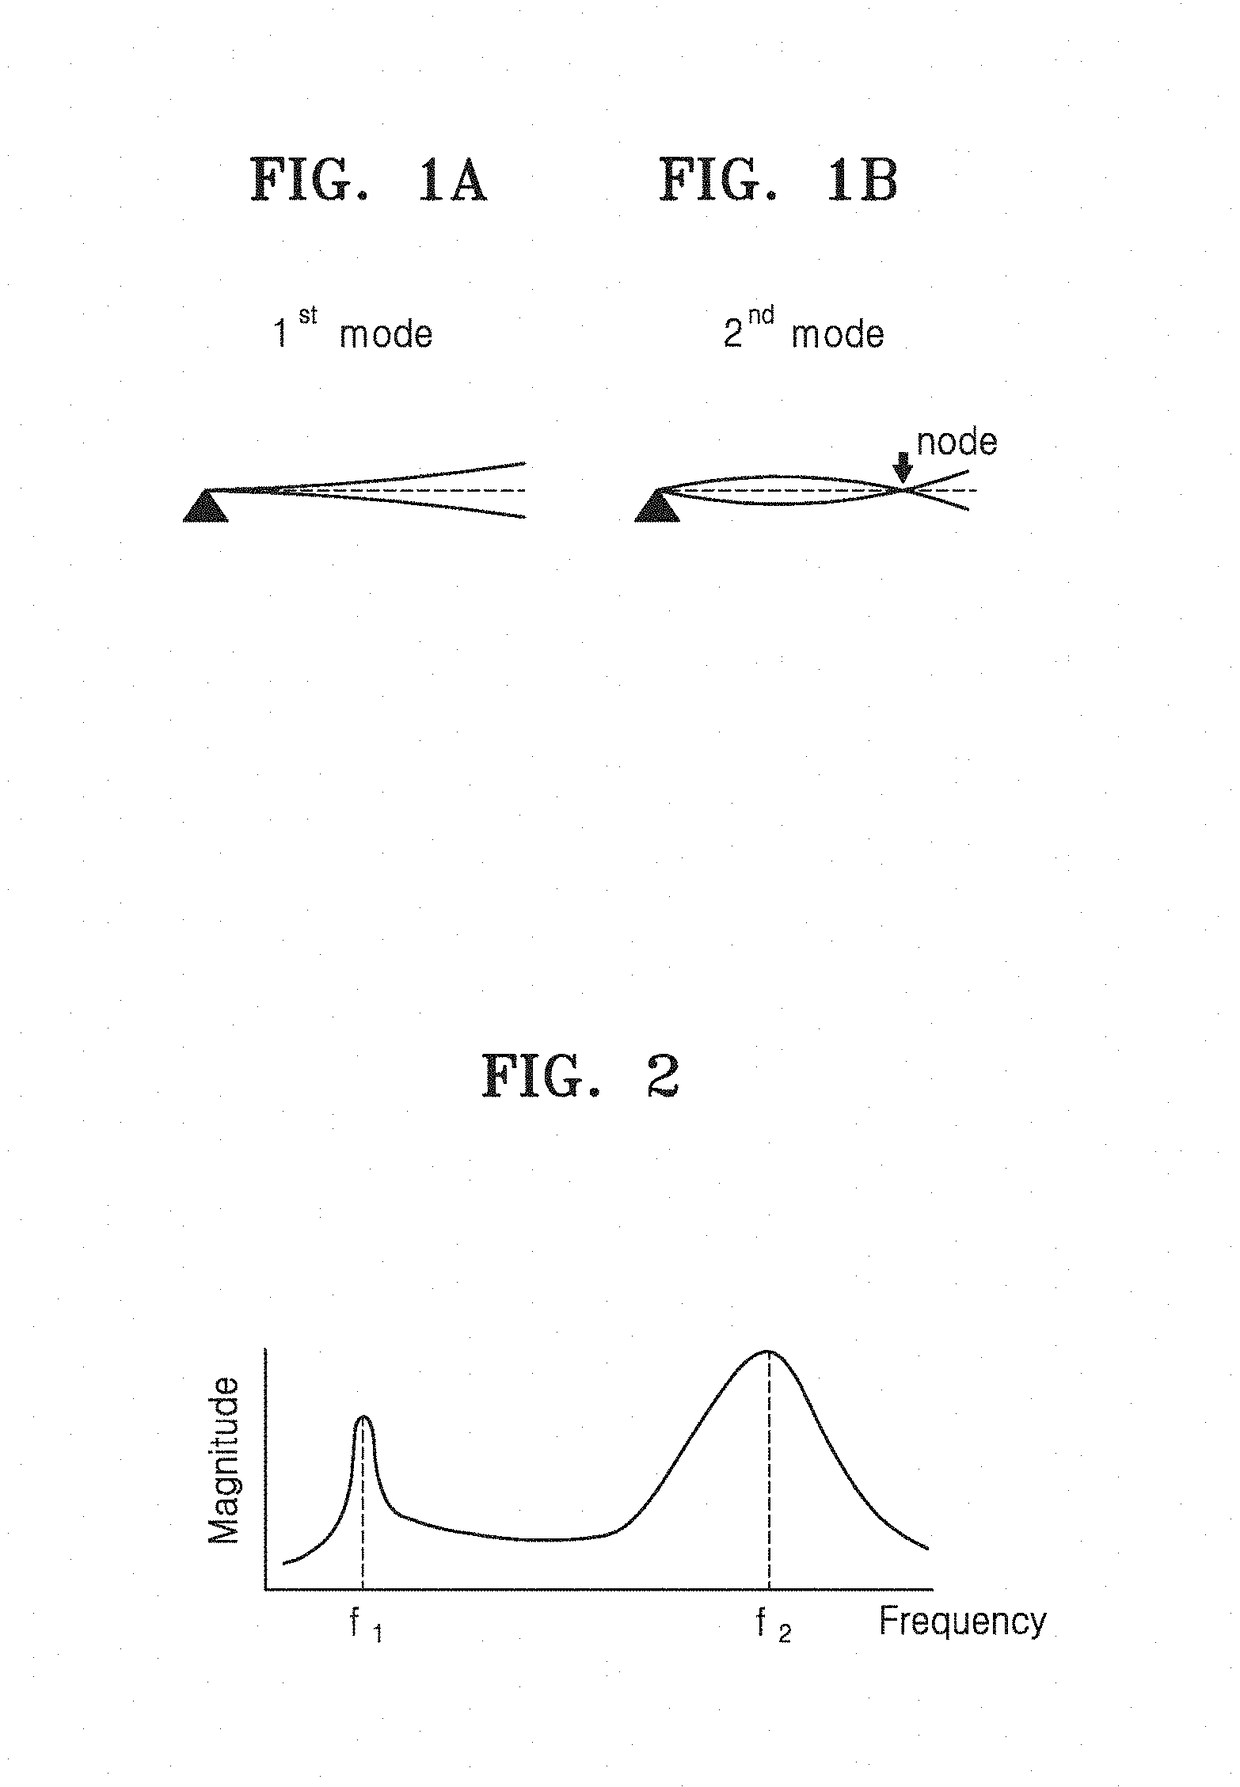 Sound/vibration spectrum analyzing device and methods of acquiring and analyzing frequency information